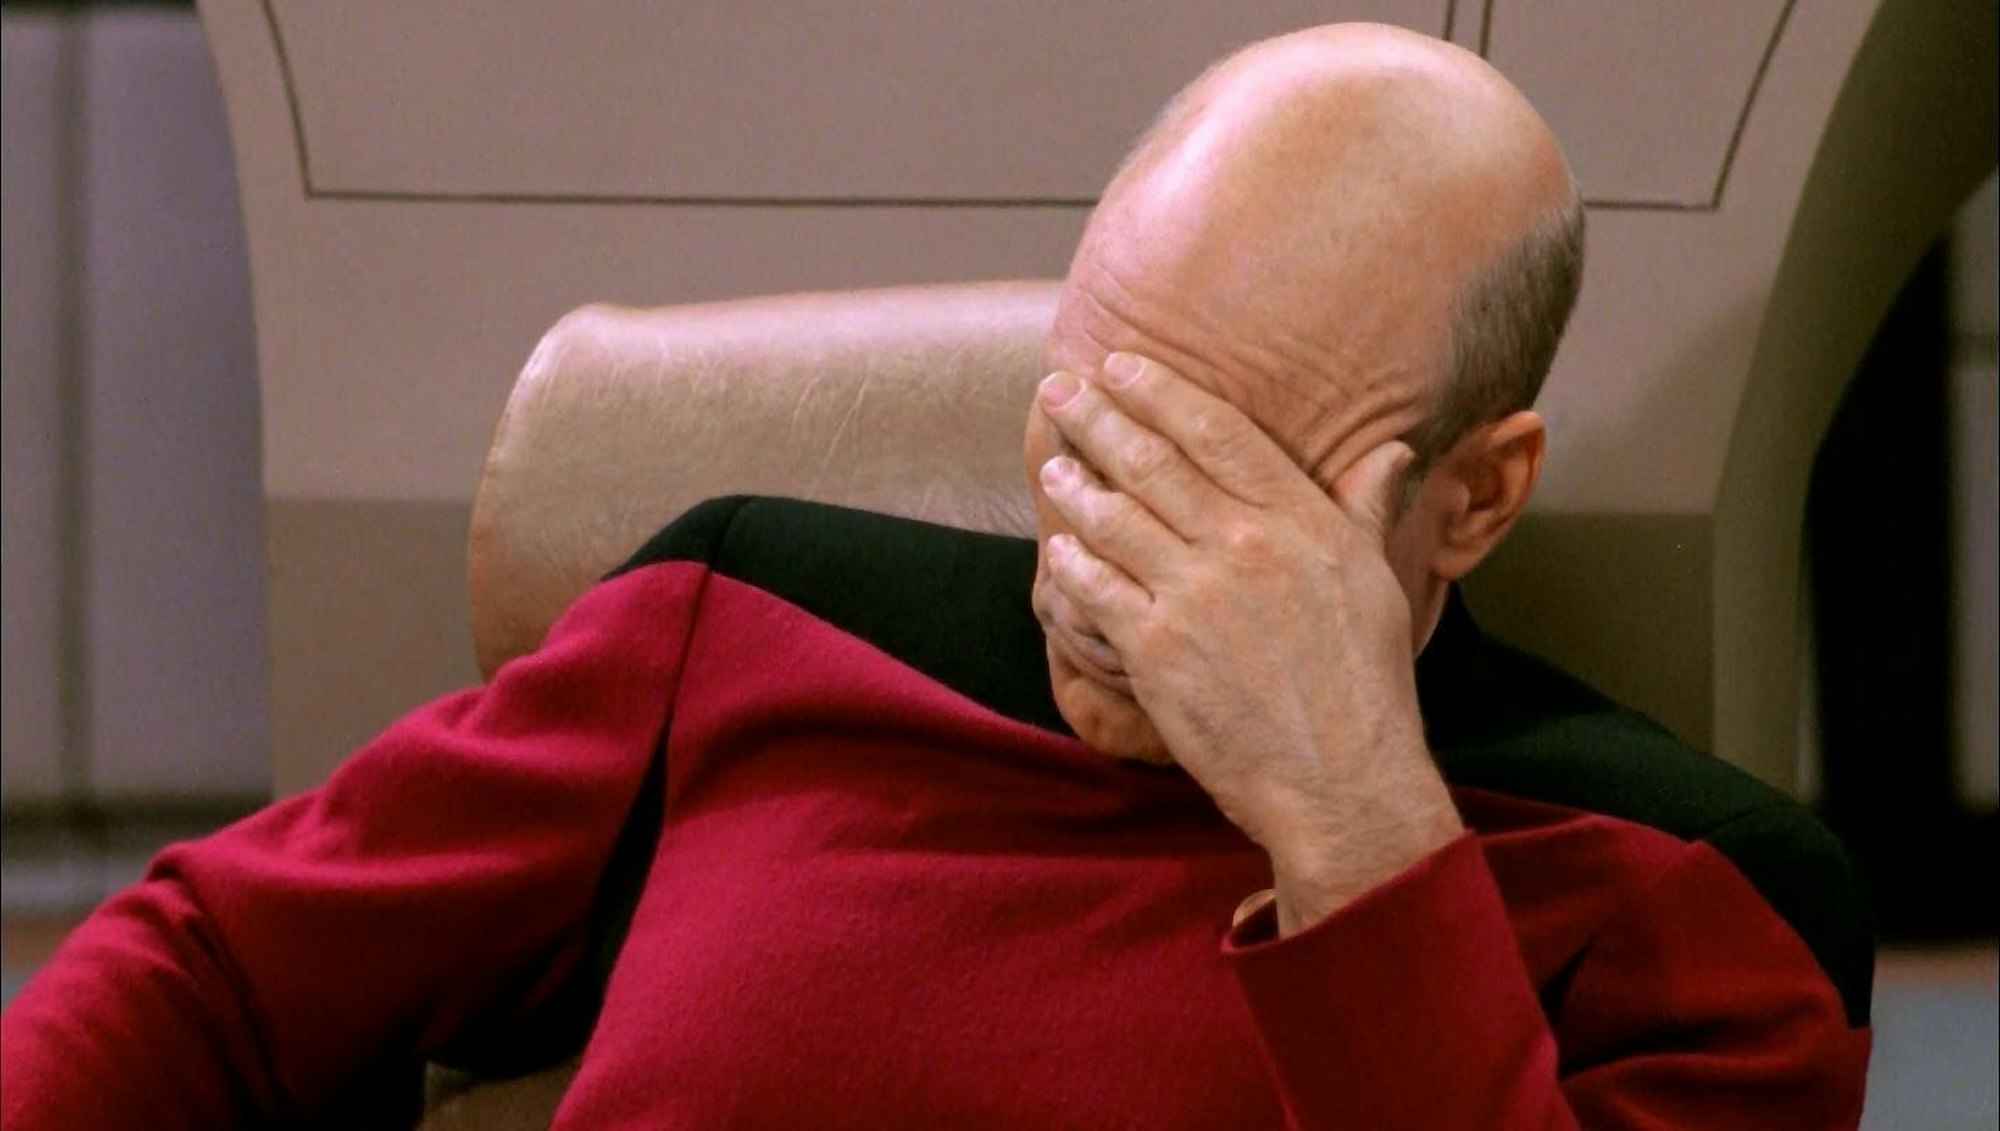 the-iconic-picard-facepalm.jpeg?w=2000&a